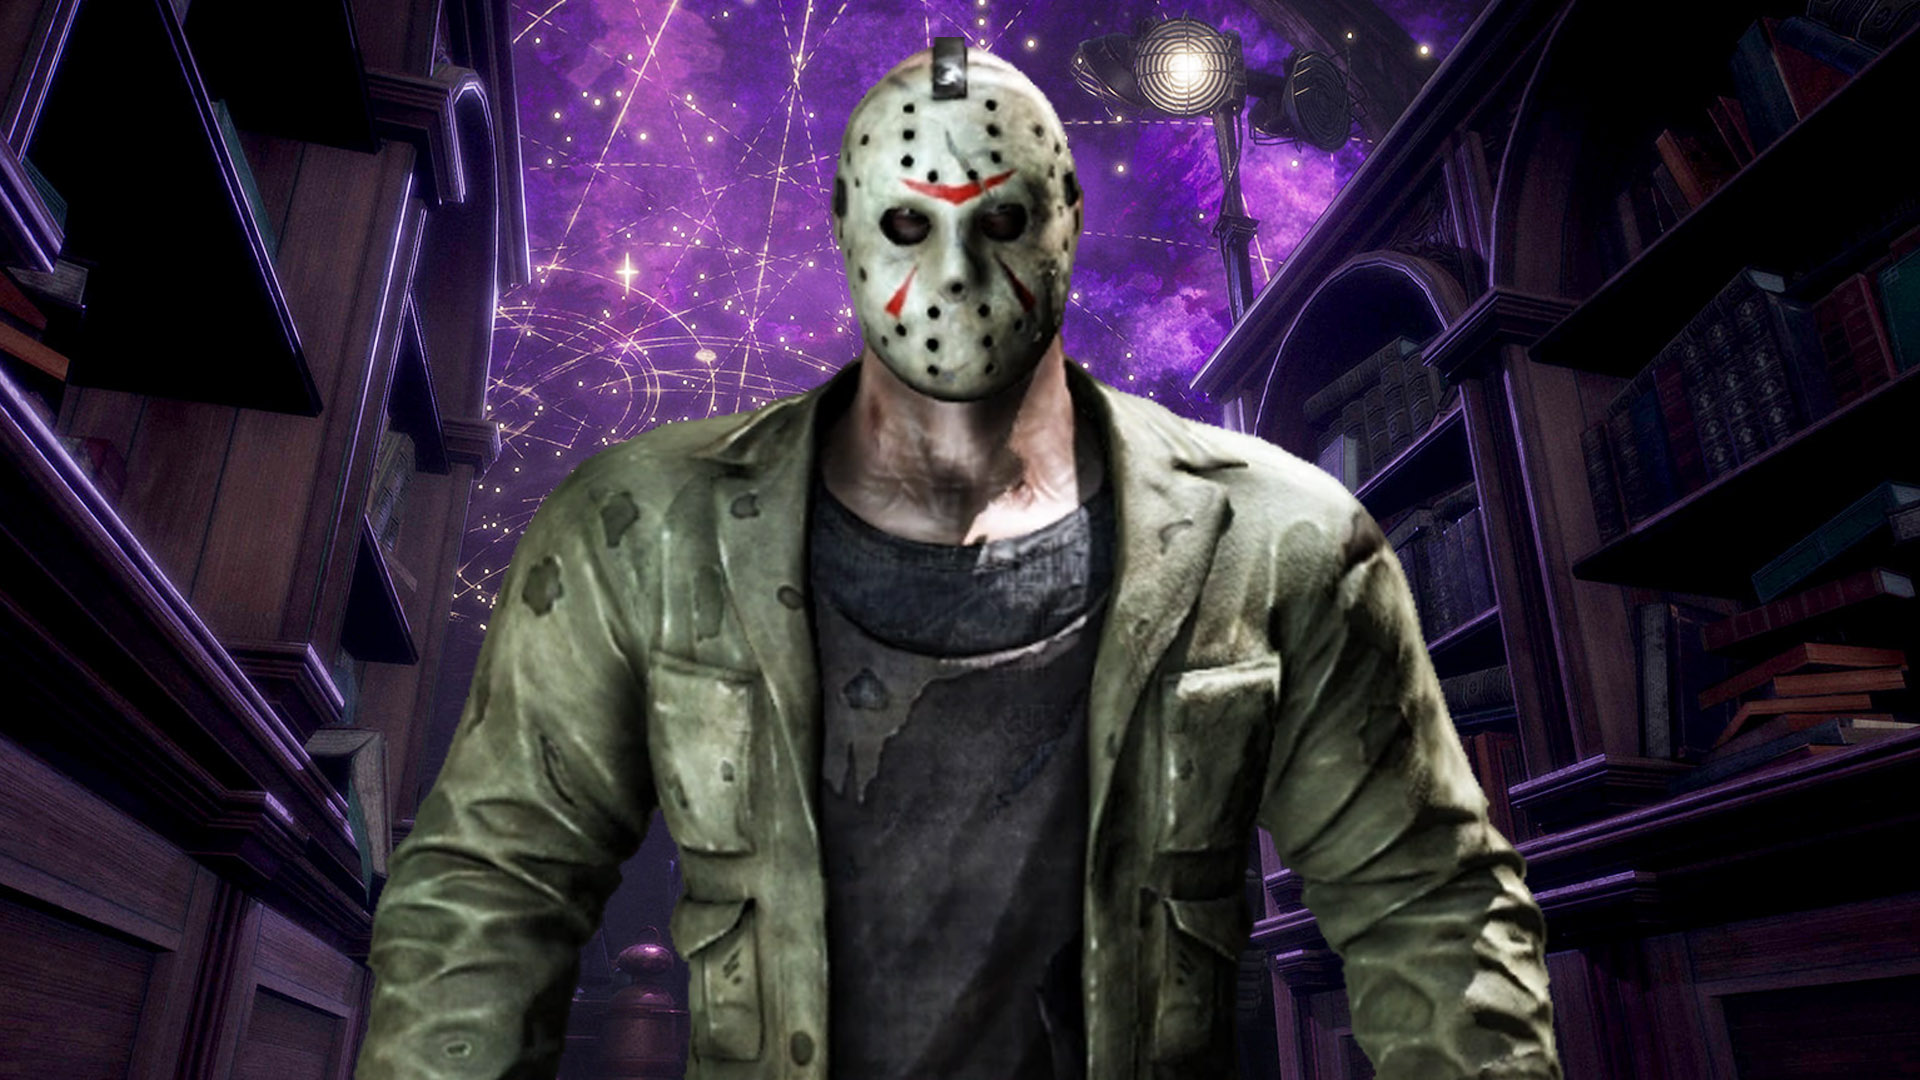 Jason may finally come to Dead by Daylight after MultiVersus inclusion